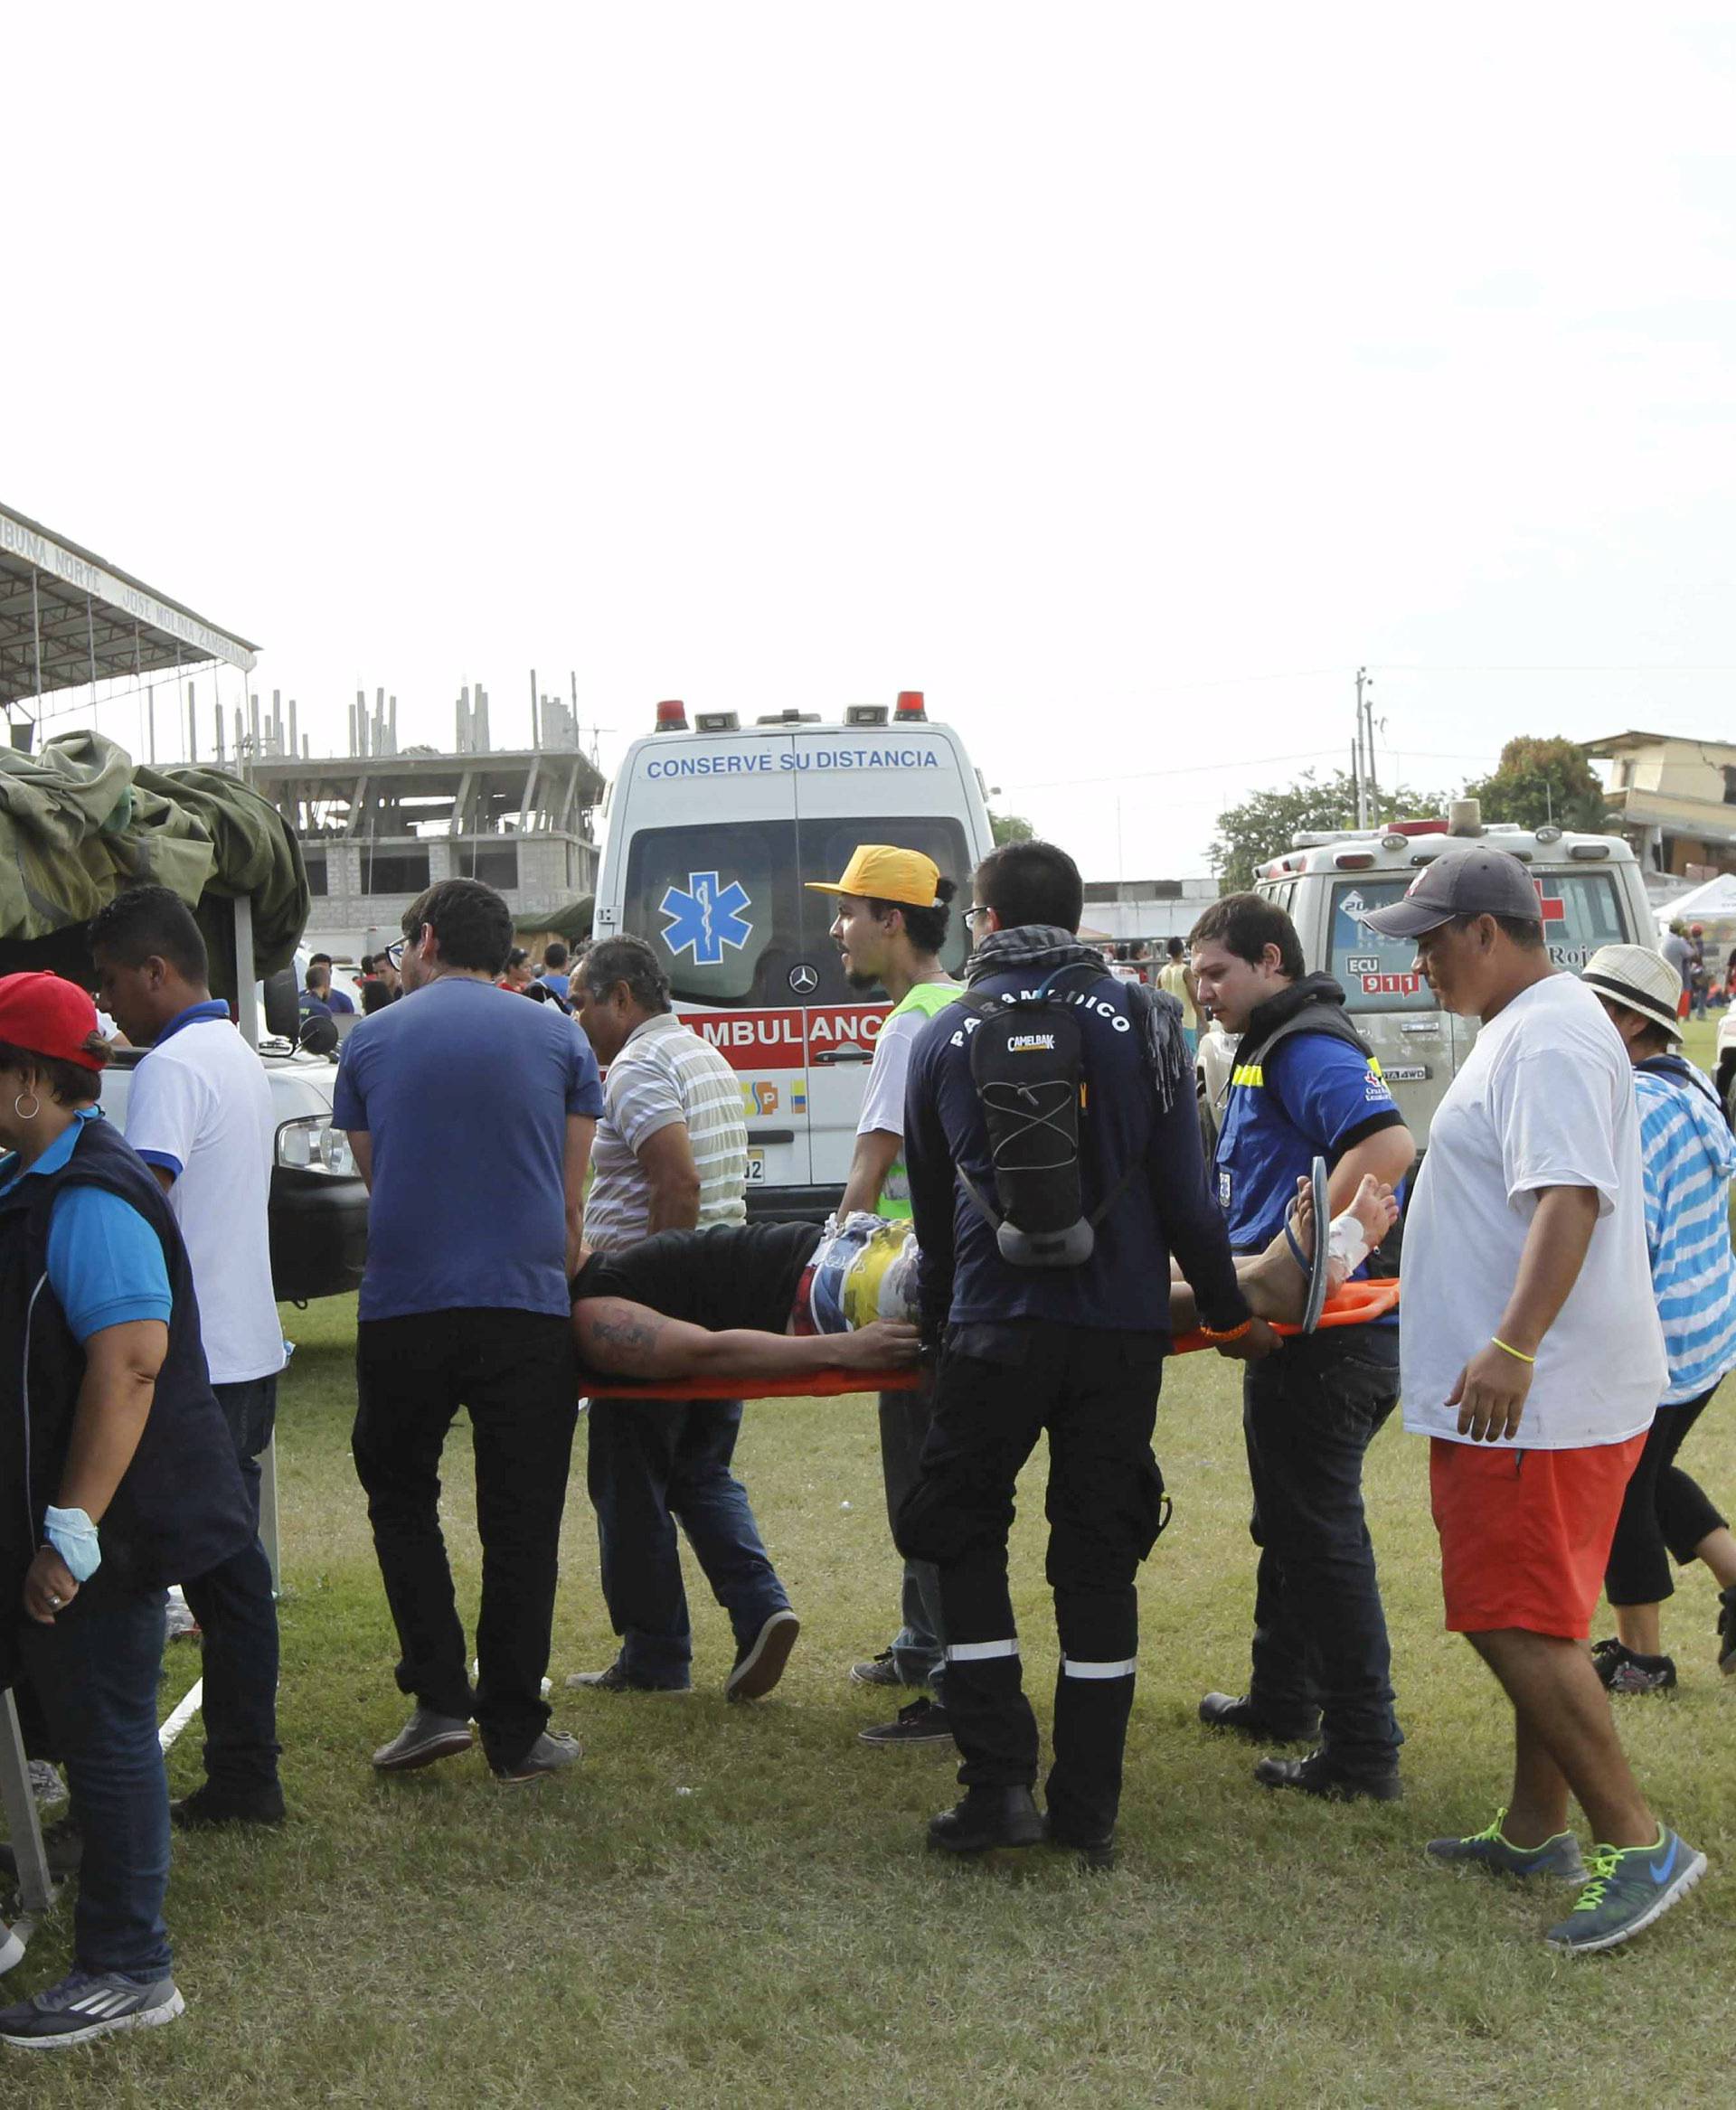 An injured person is attended to at the Maximino Puertas stadium as rescue efforts continue in Pedernales, after an earthquake struck off Ecuador's Pacific coast